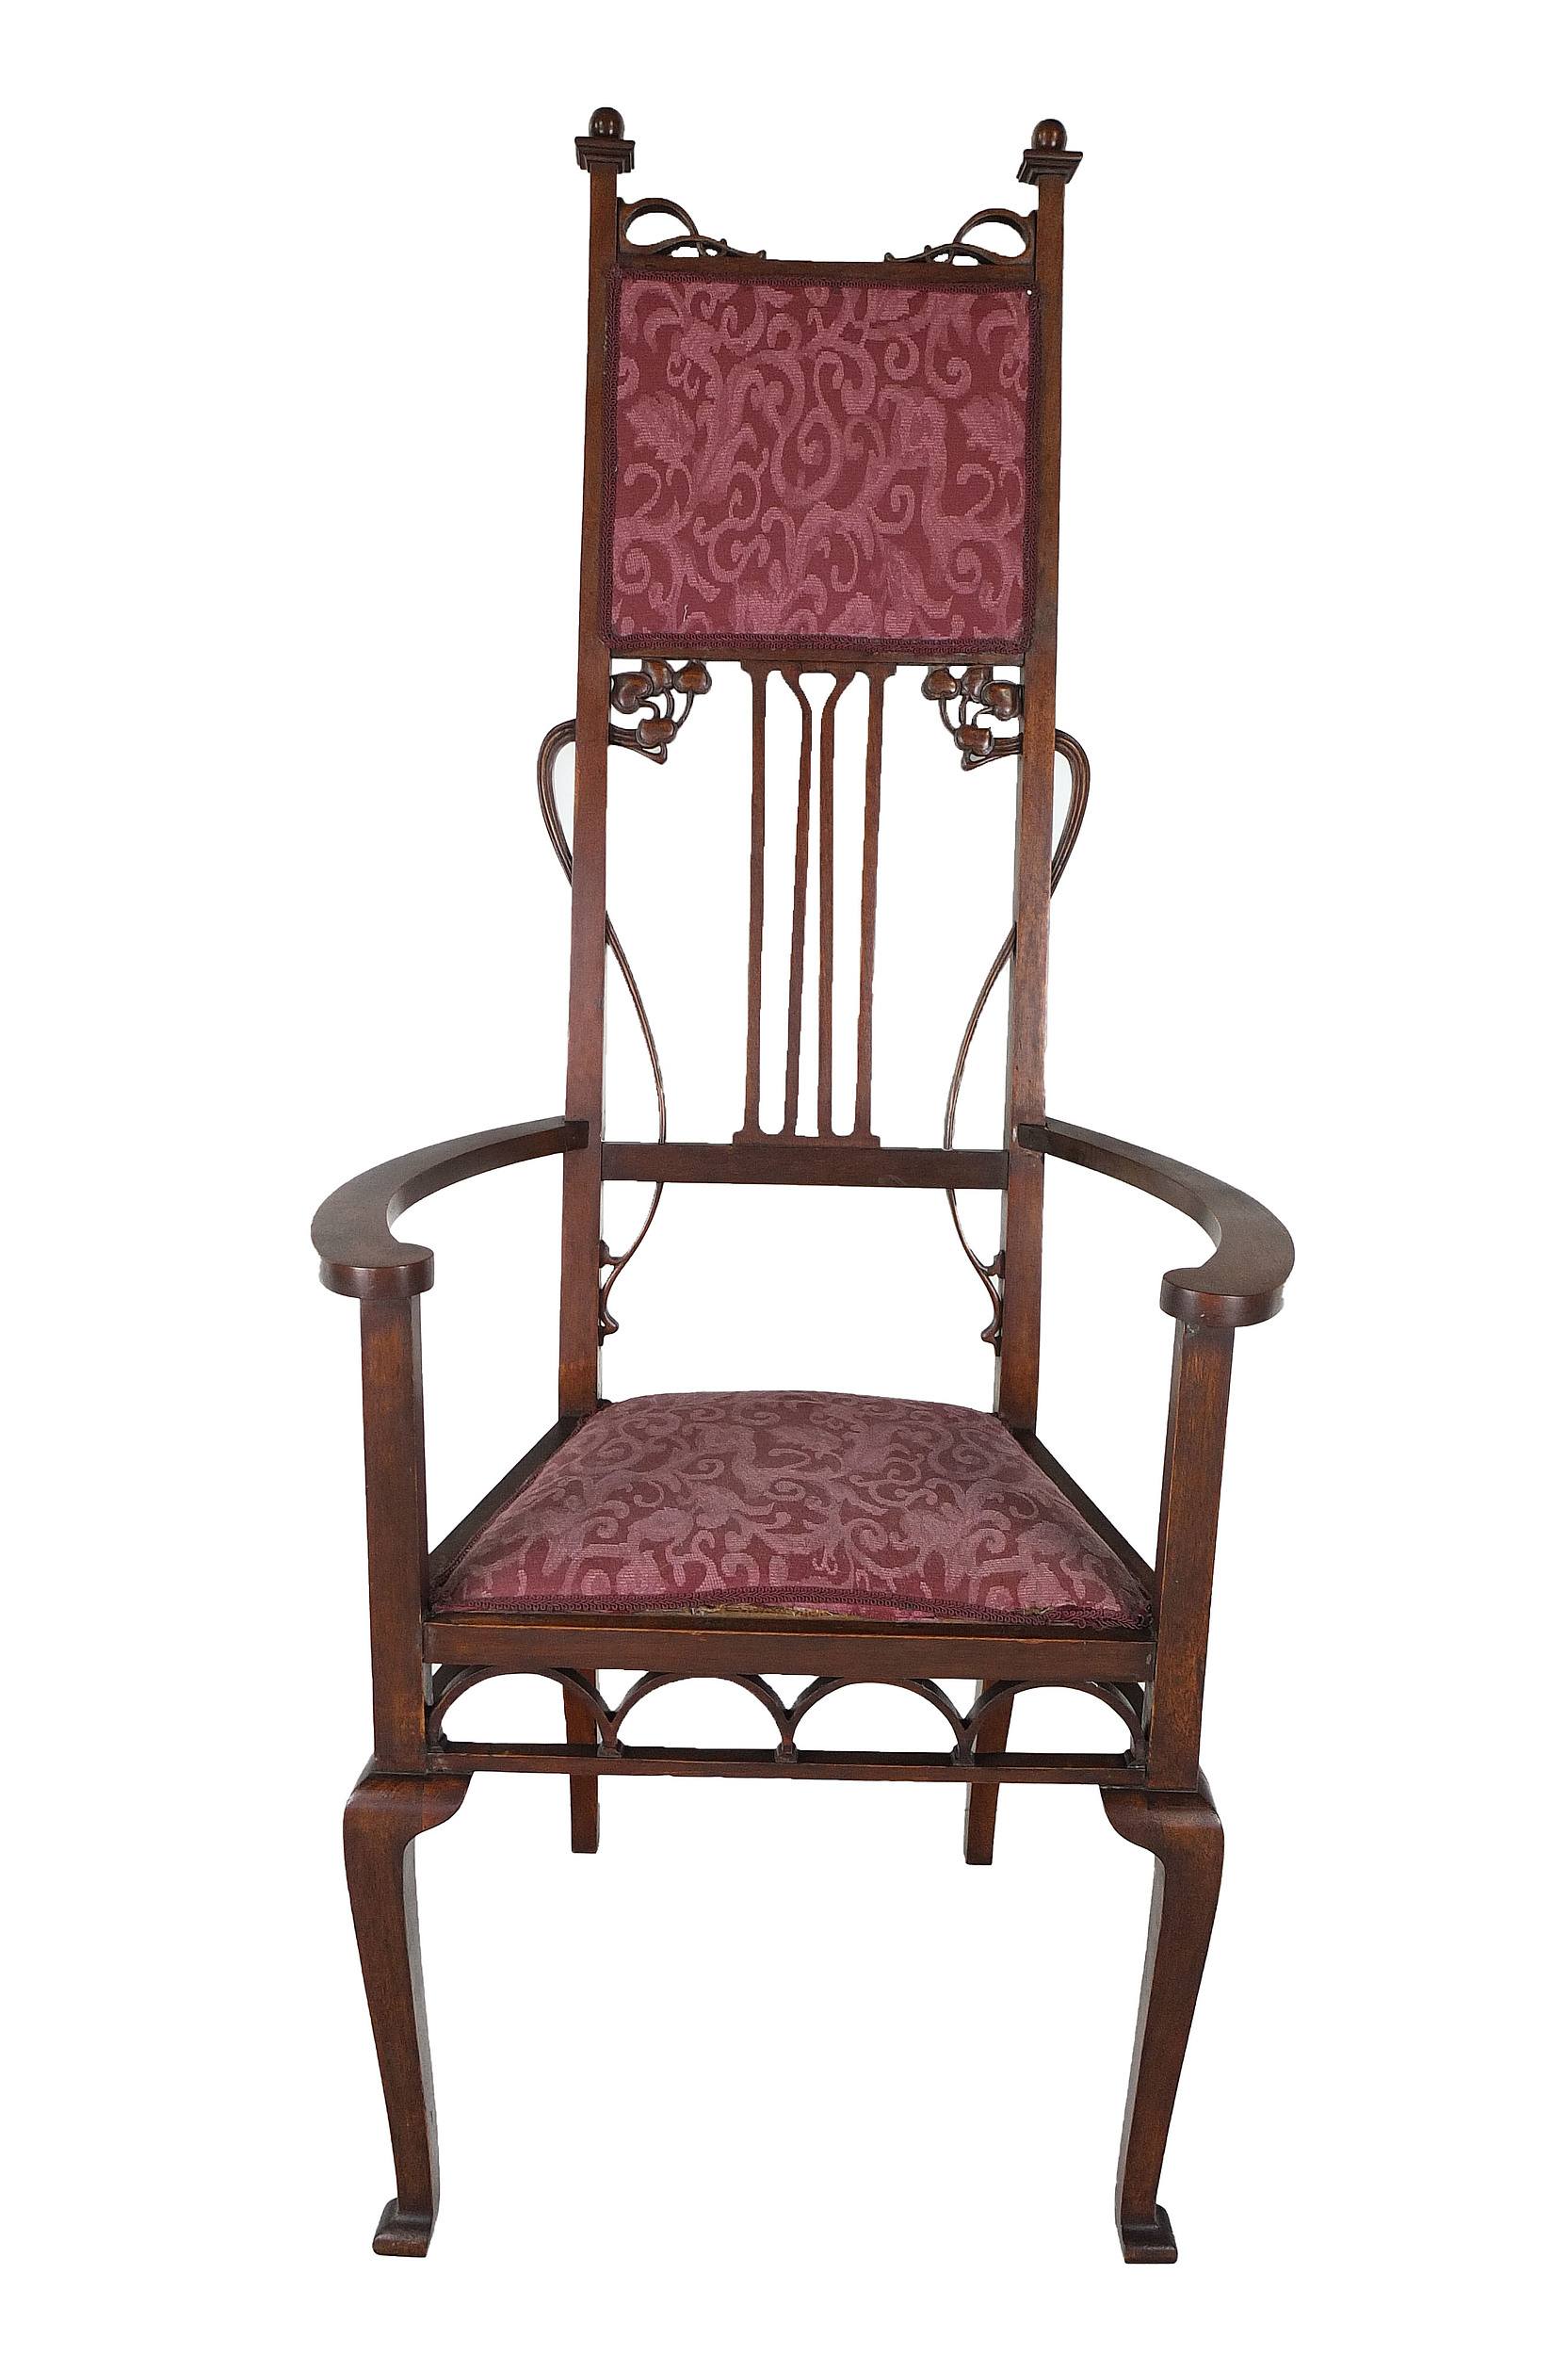 'Impressive Large Australian Arts & Crafts Style Carved Maple Throne Chair, Early 20th Century'